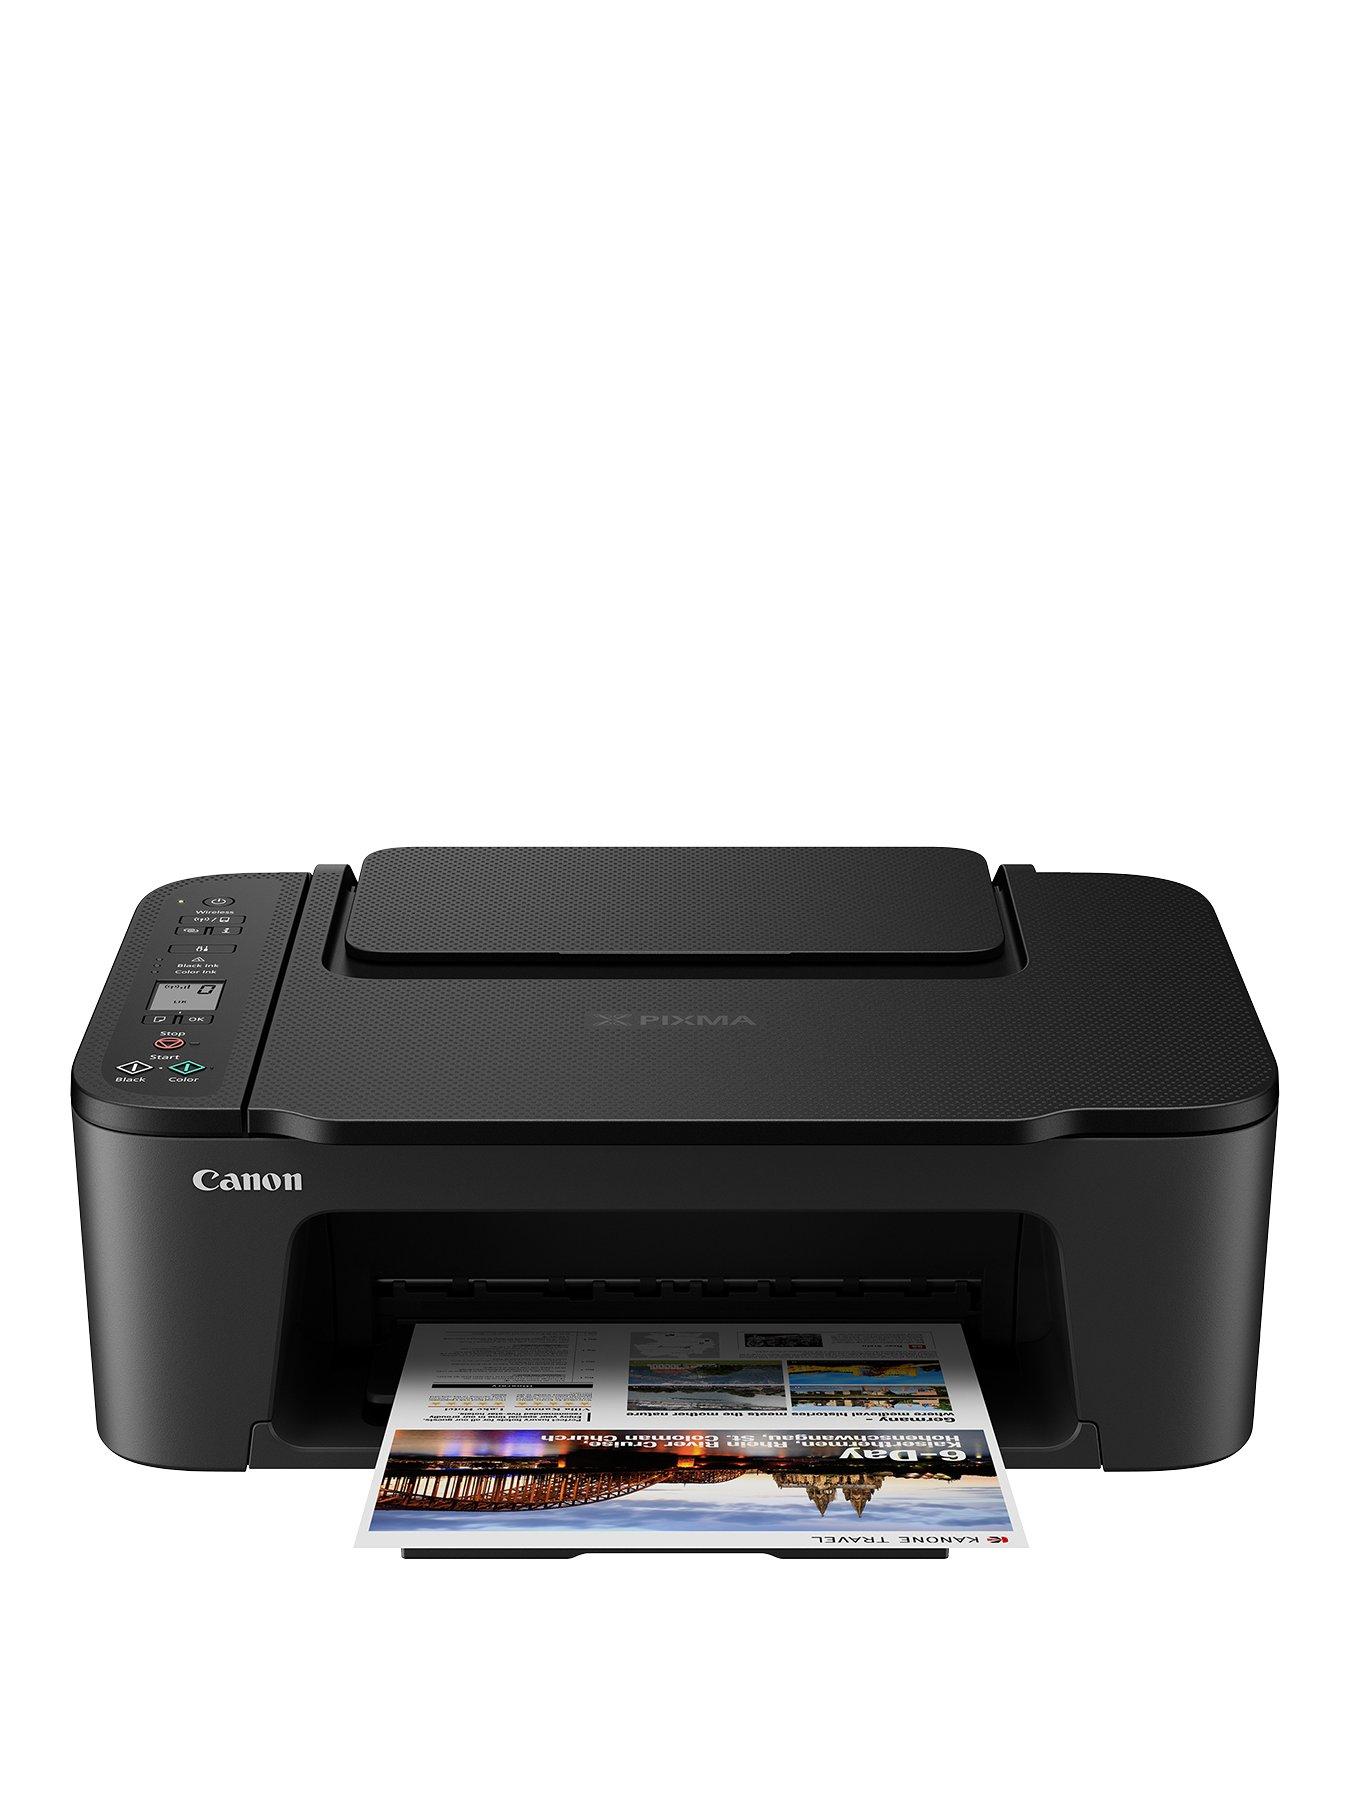 HP Envy Inspire 7220e All in One A4 Printer Bundle with Ink